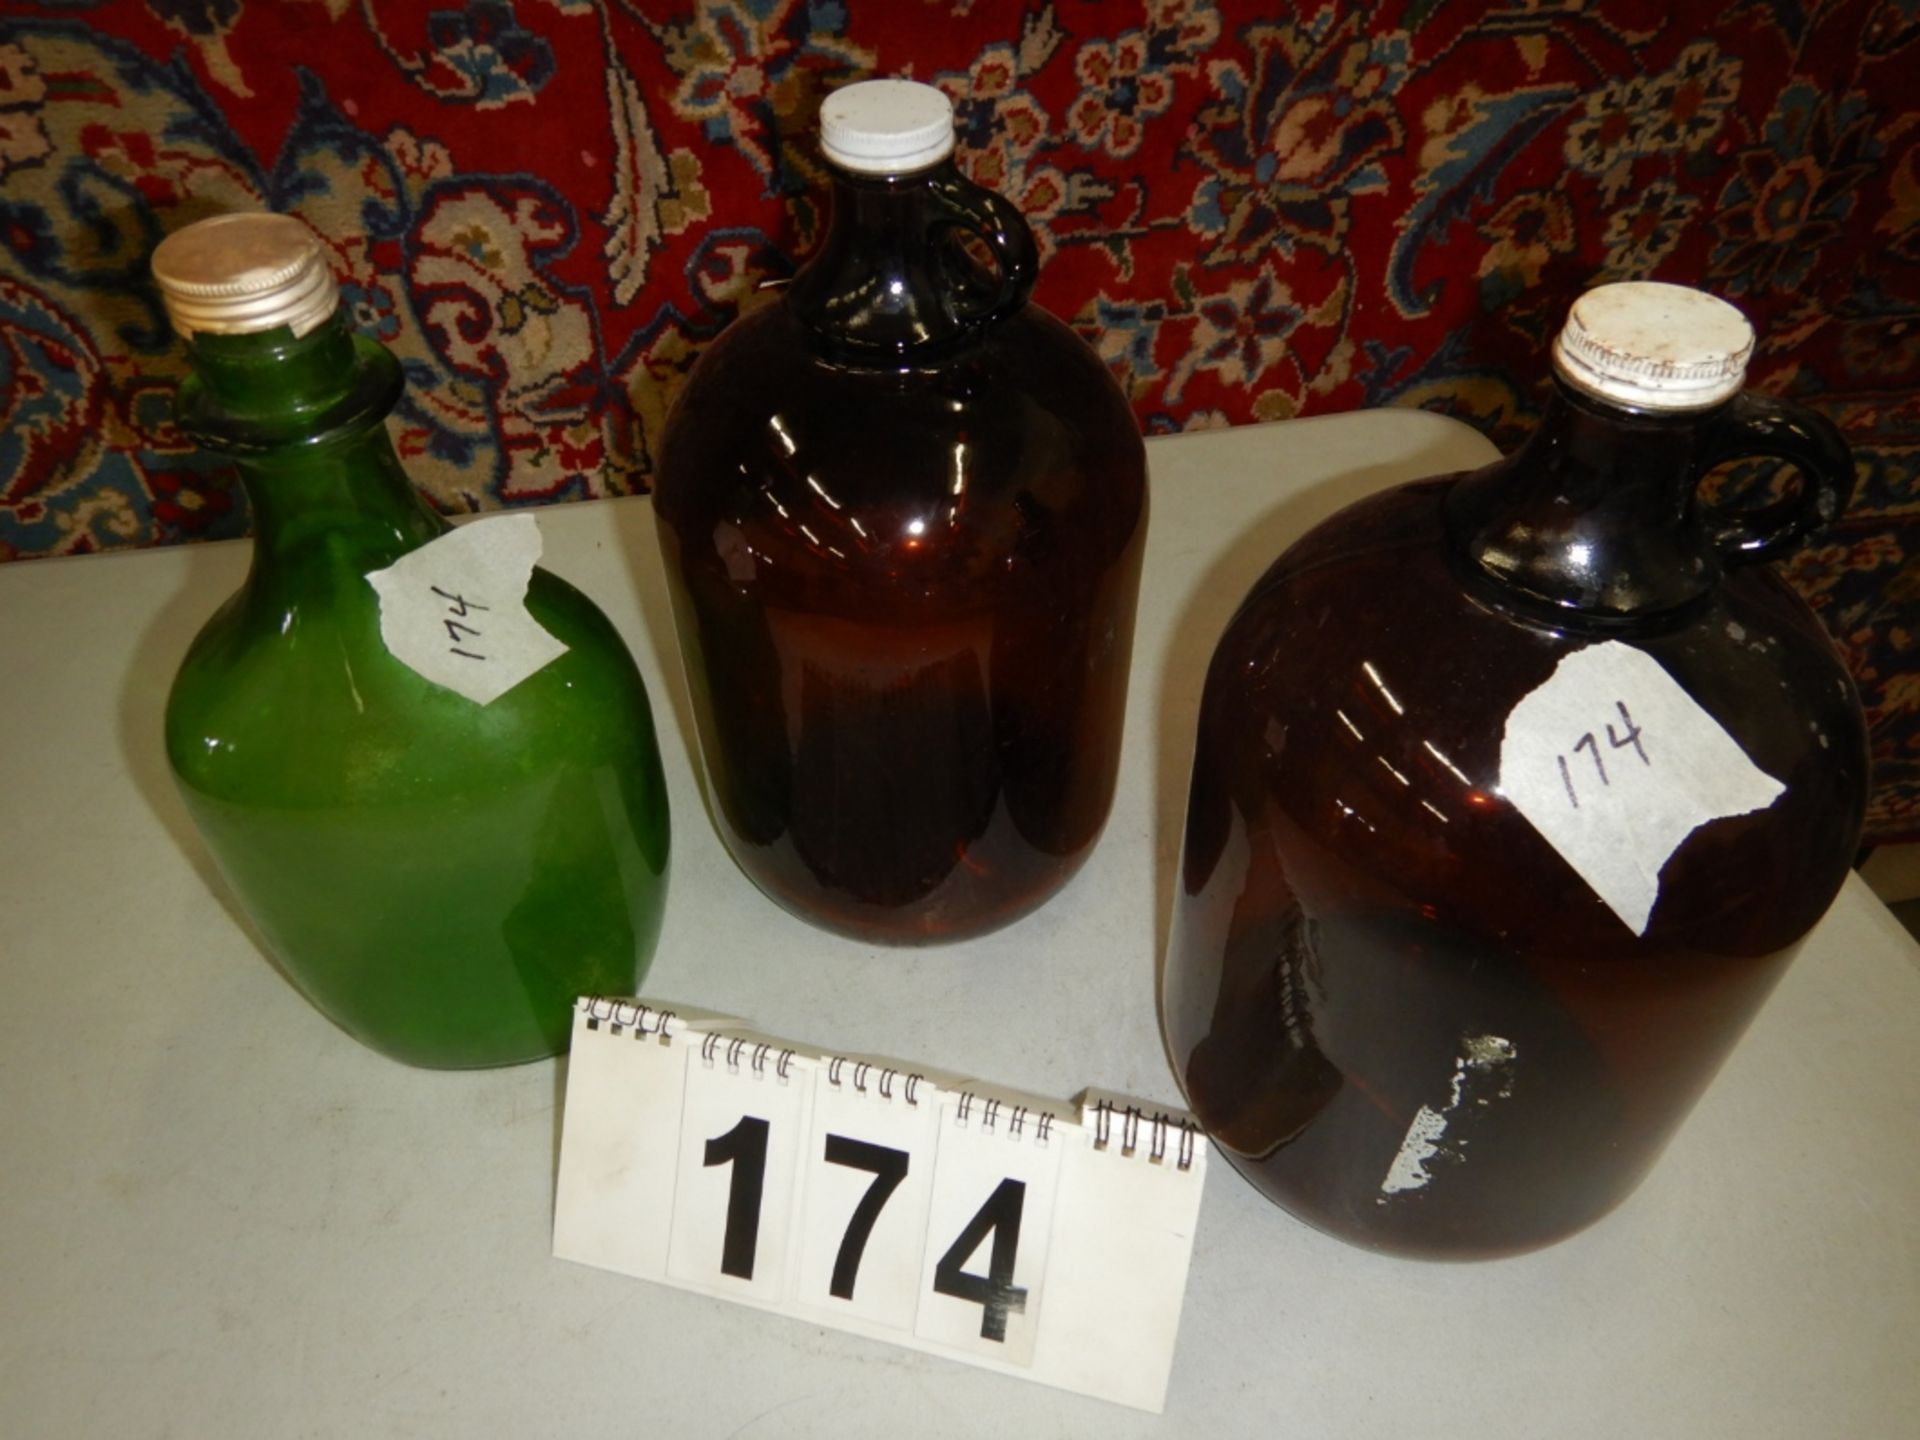 TWO BROWN GALLON JUGS WITH LIDS & ONE GREEN 1/2 GALLON JUG